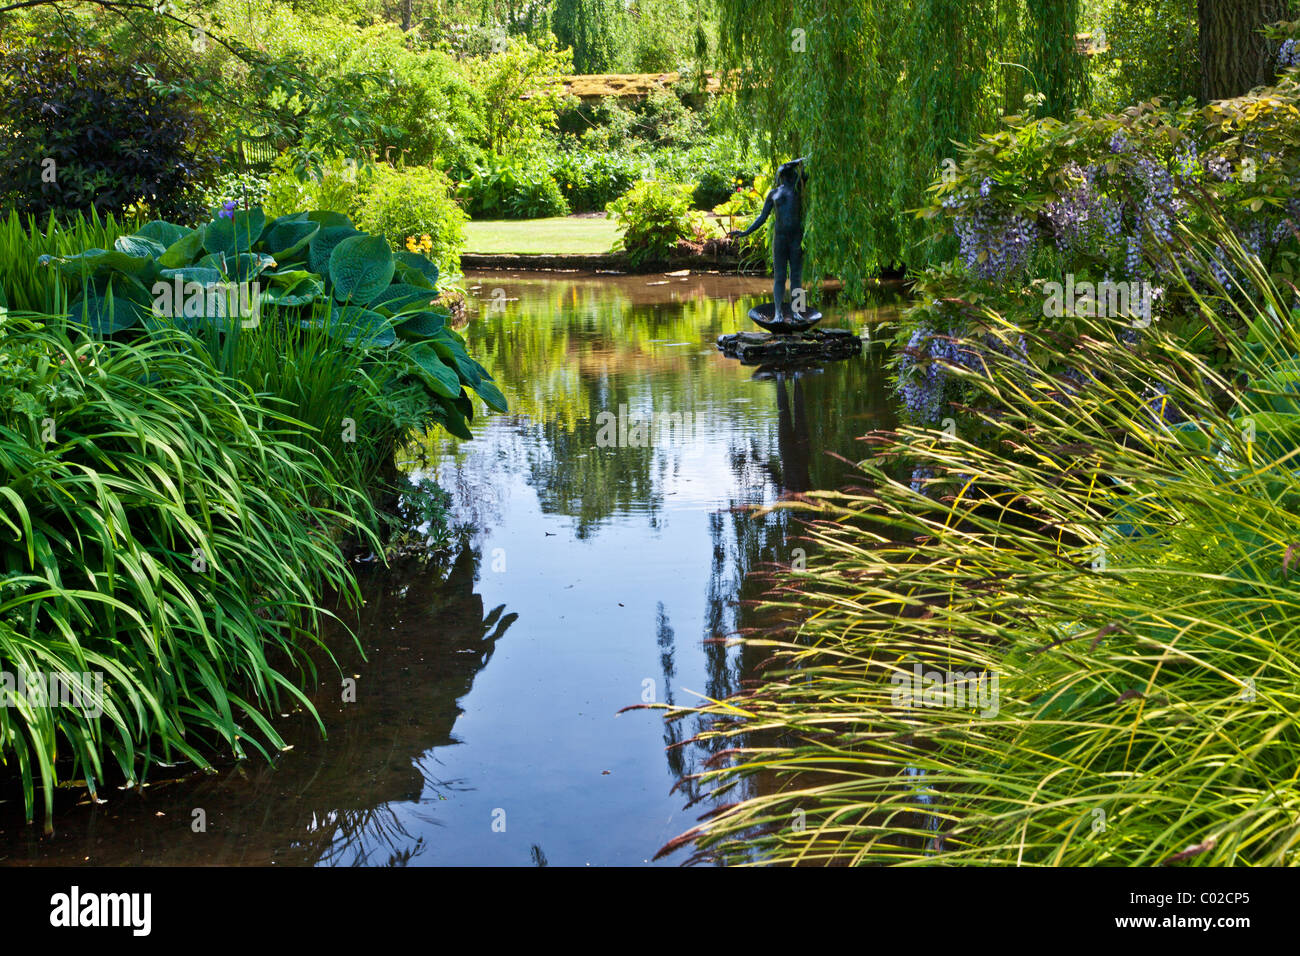 An ornamental garden pond in an English country garden with statue,ferns, and a weeping willow. Stock Photo